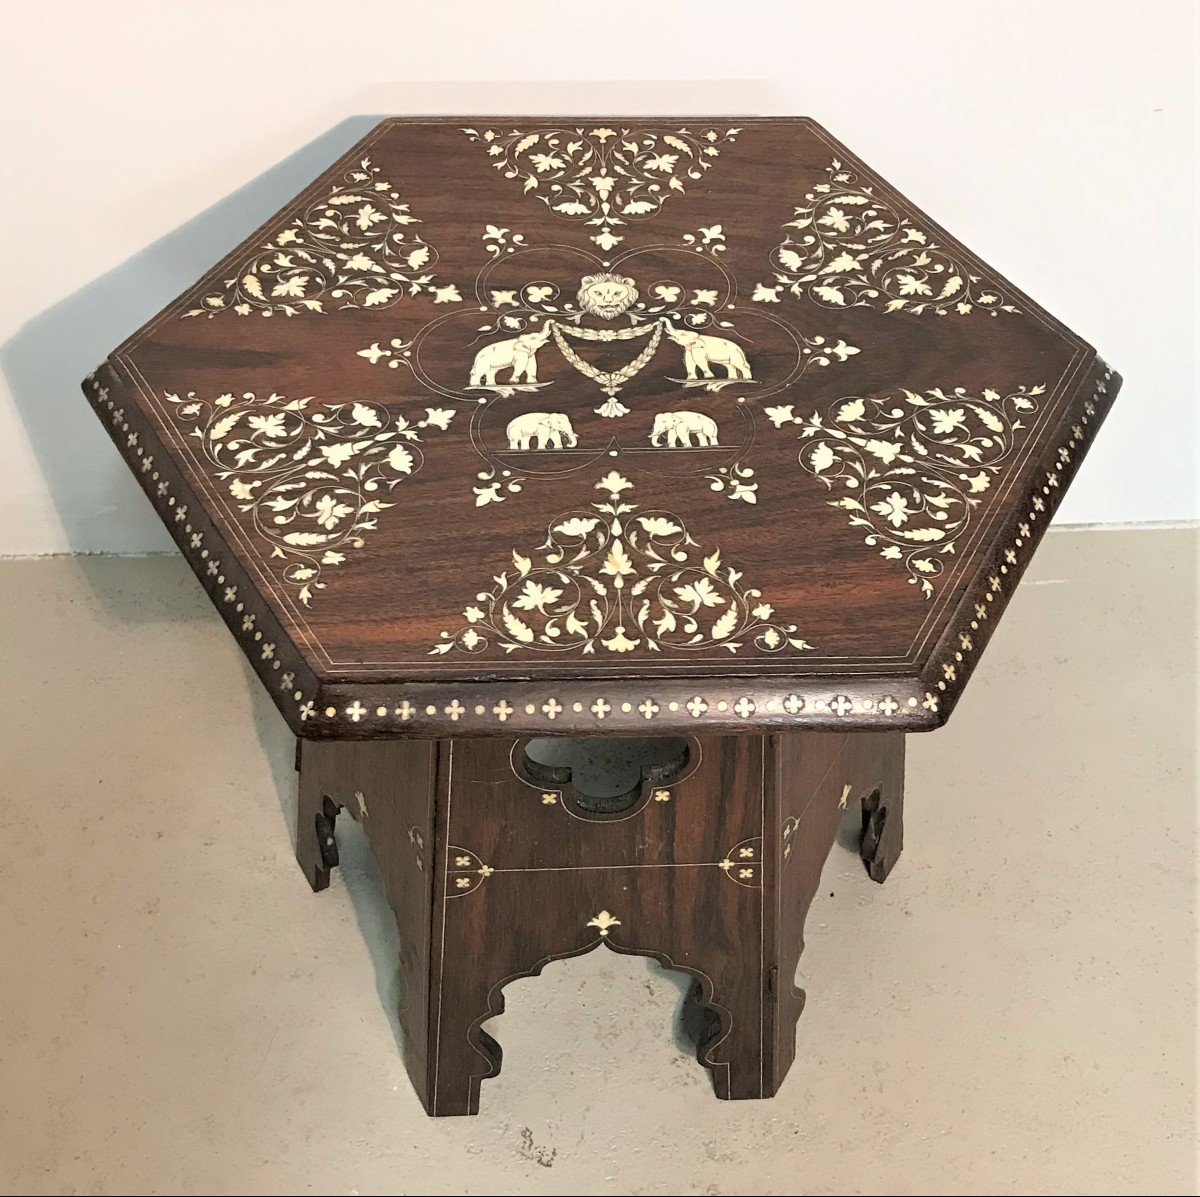 Small Syrian Coffee Table In Ivory Marquetry With Elephant Decoration